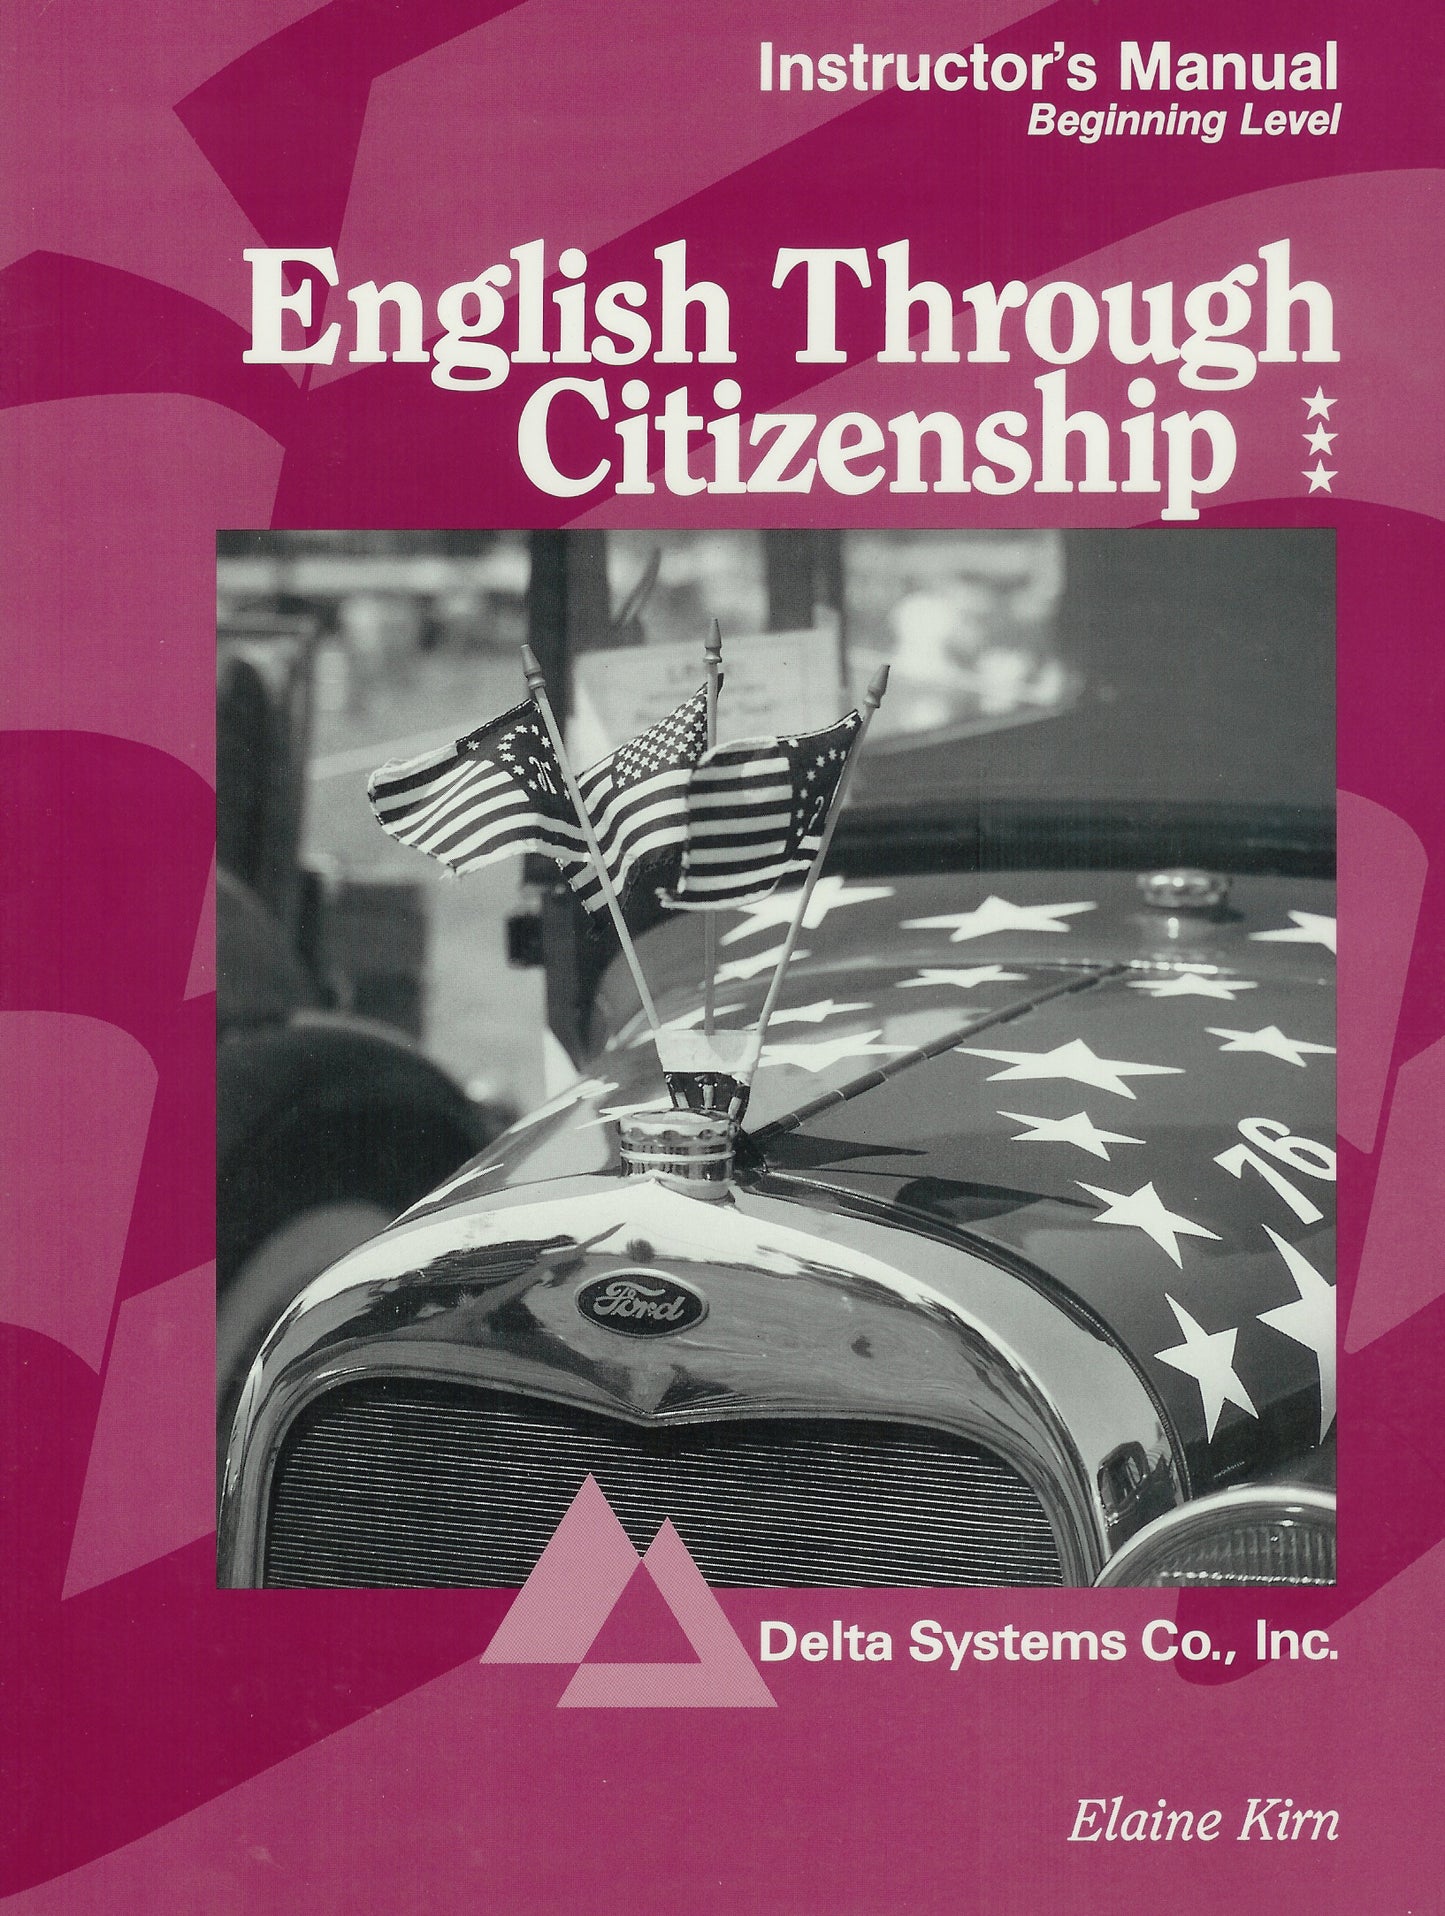 H-02.05 Instructor’s Manual, Get Instructions & Ideas on How to Teach / Learn English Through Citizenship: Beginning Level